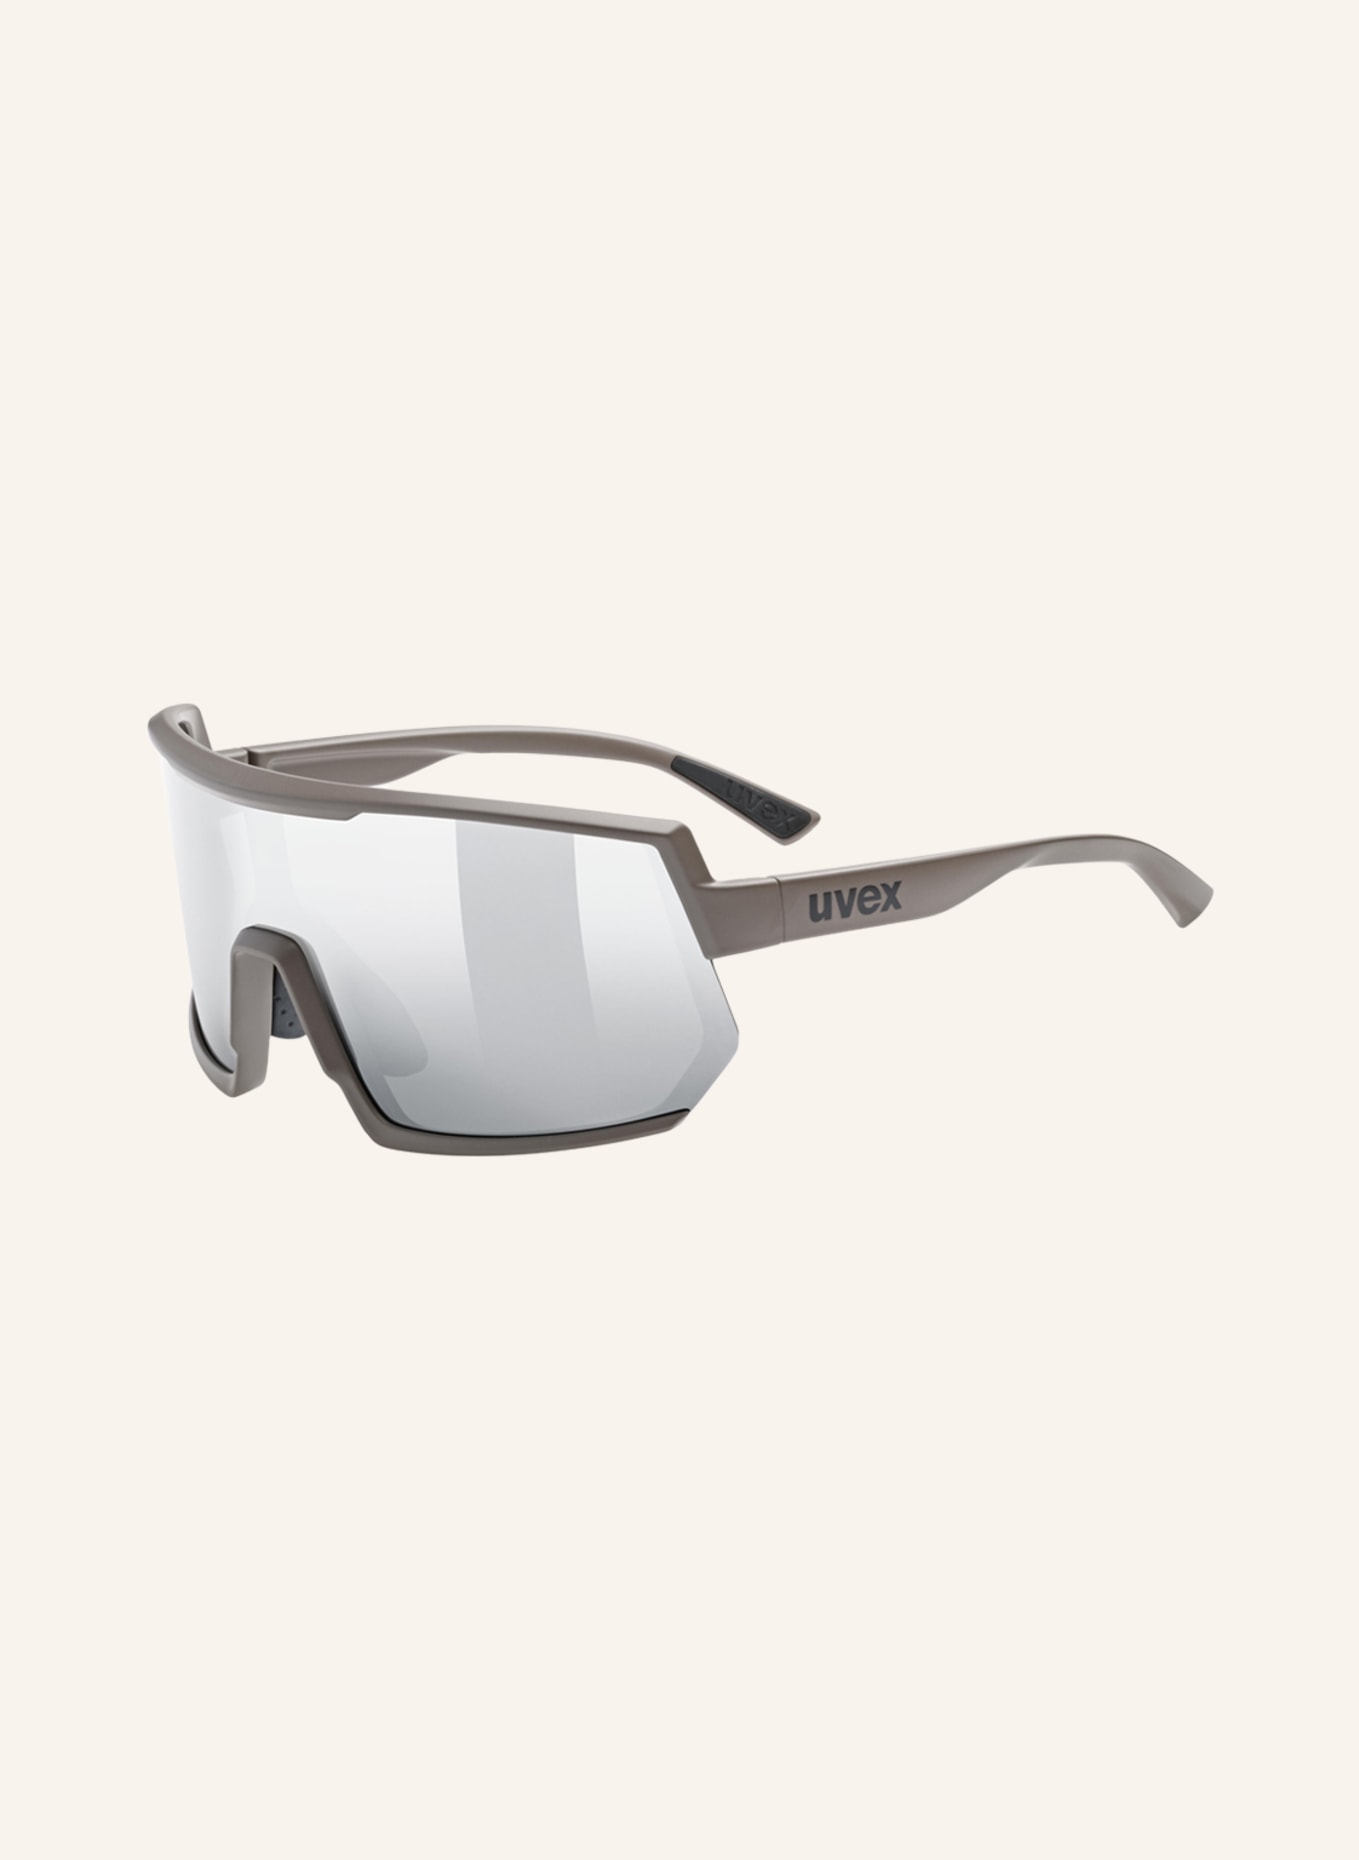 uvex Cycling glasses SPORTSTYLE 235, Color: 03545 - LIGHT GRAY / DARK GRAY MIRRORED (Image 1)